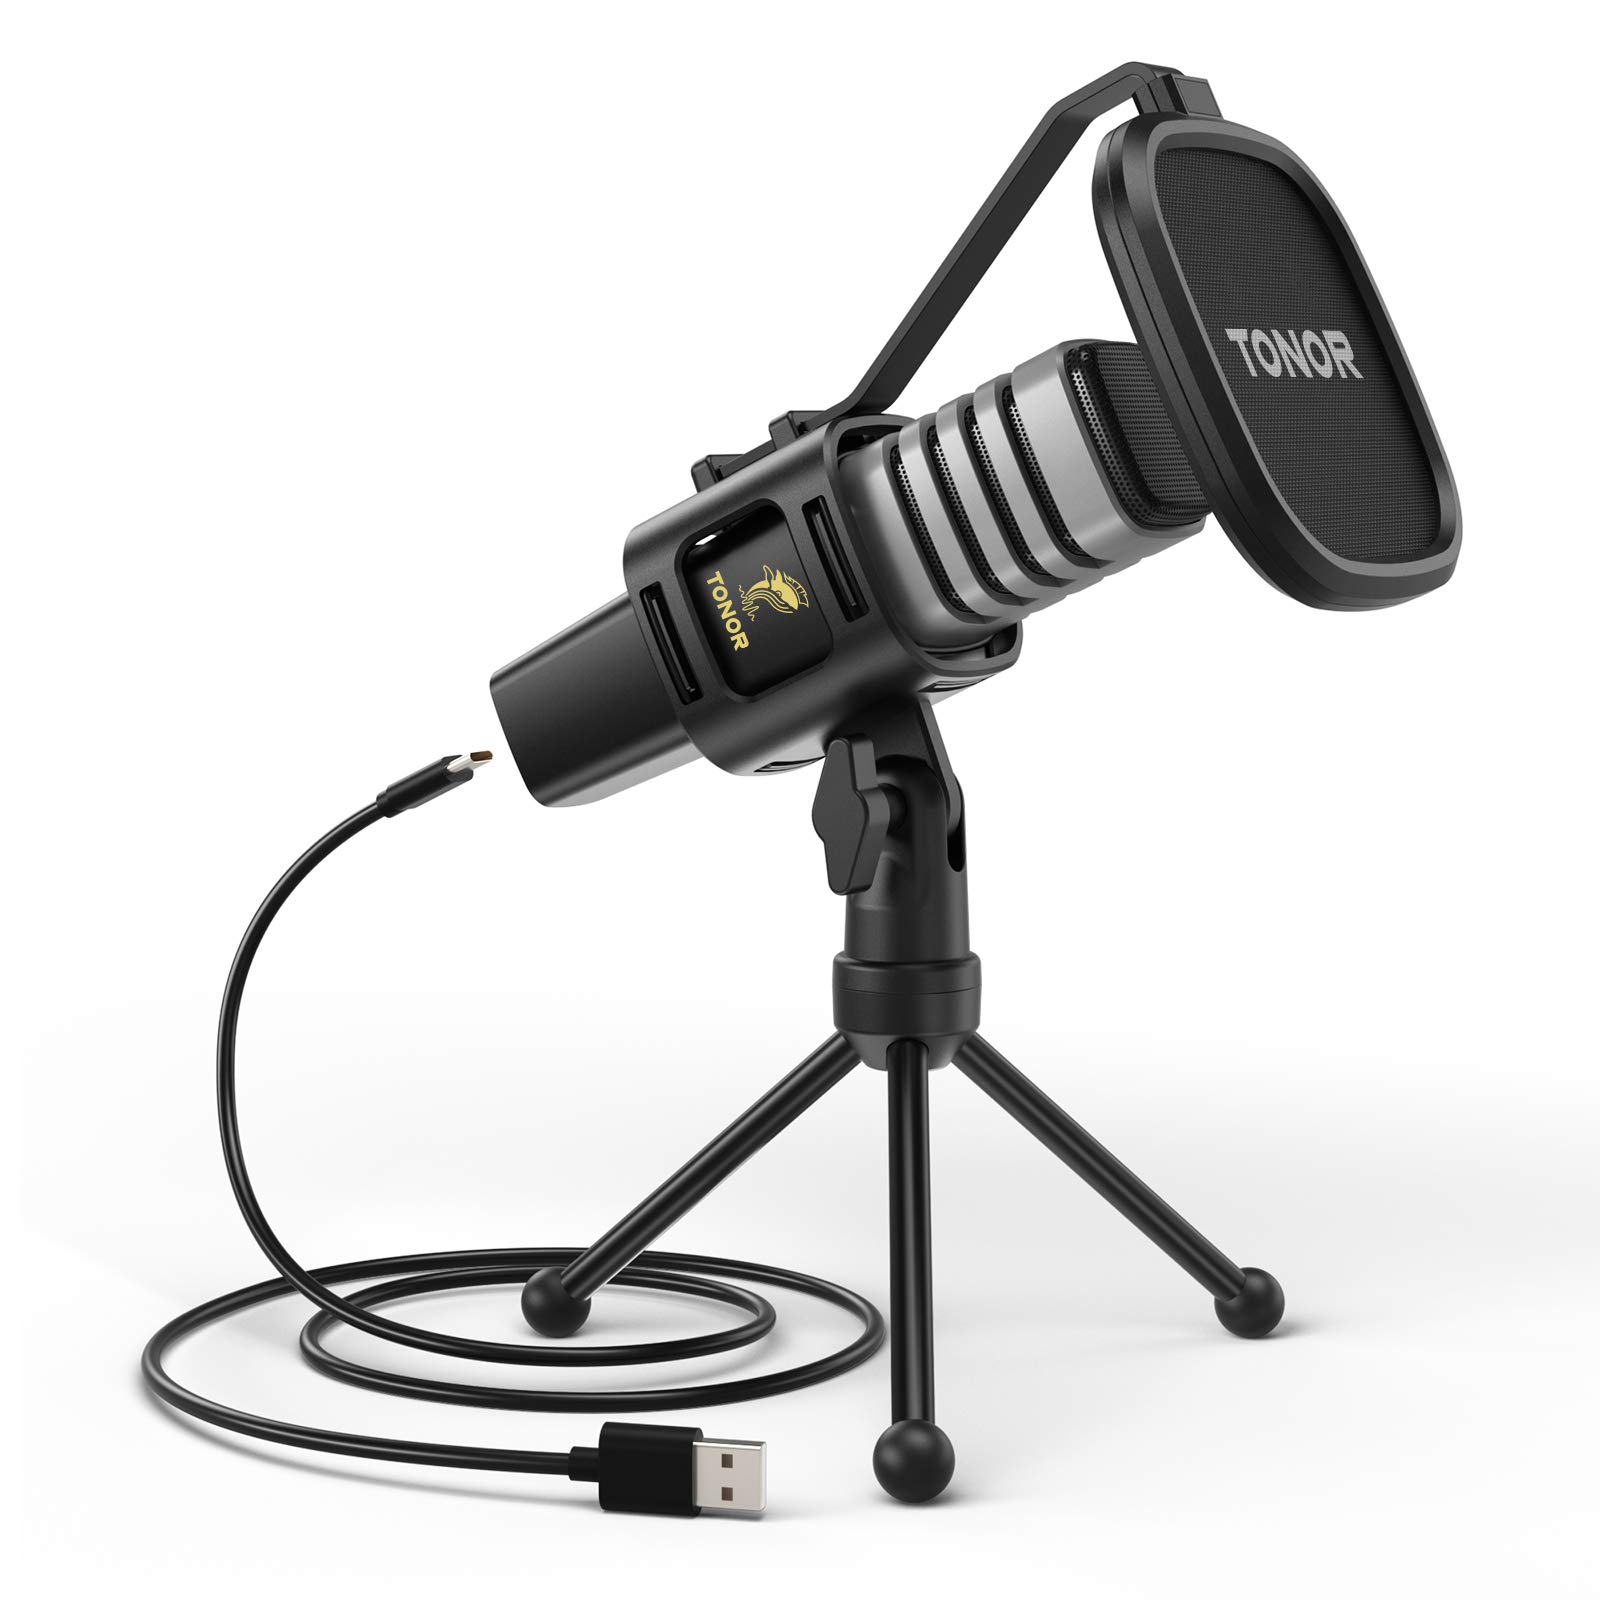 TONOR USB Microphone, Cardioid Condenser Mic with Tripod Stand, Pop Filter, Shock Mount, Compatible with Windows, MacOS, Linux, Ideal for Gaming, Streaming, Podcasting, YouTube, Voice Over, Twitch